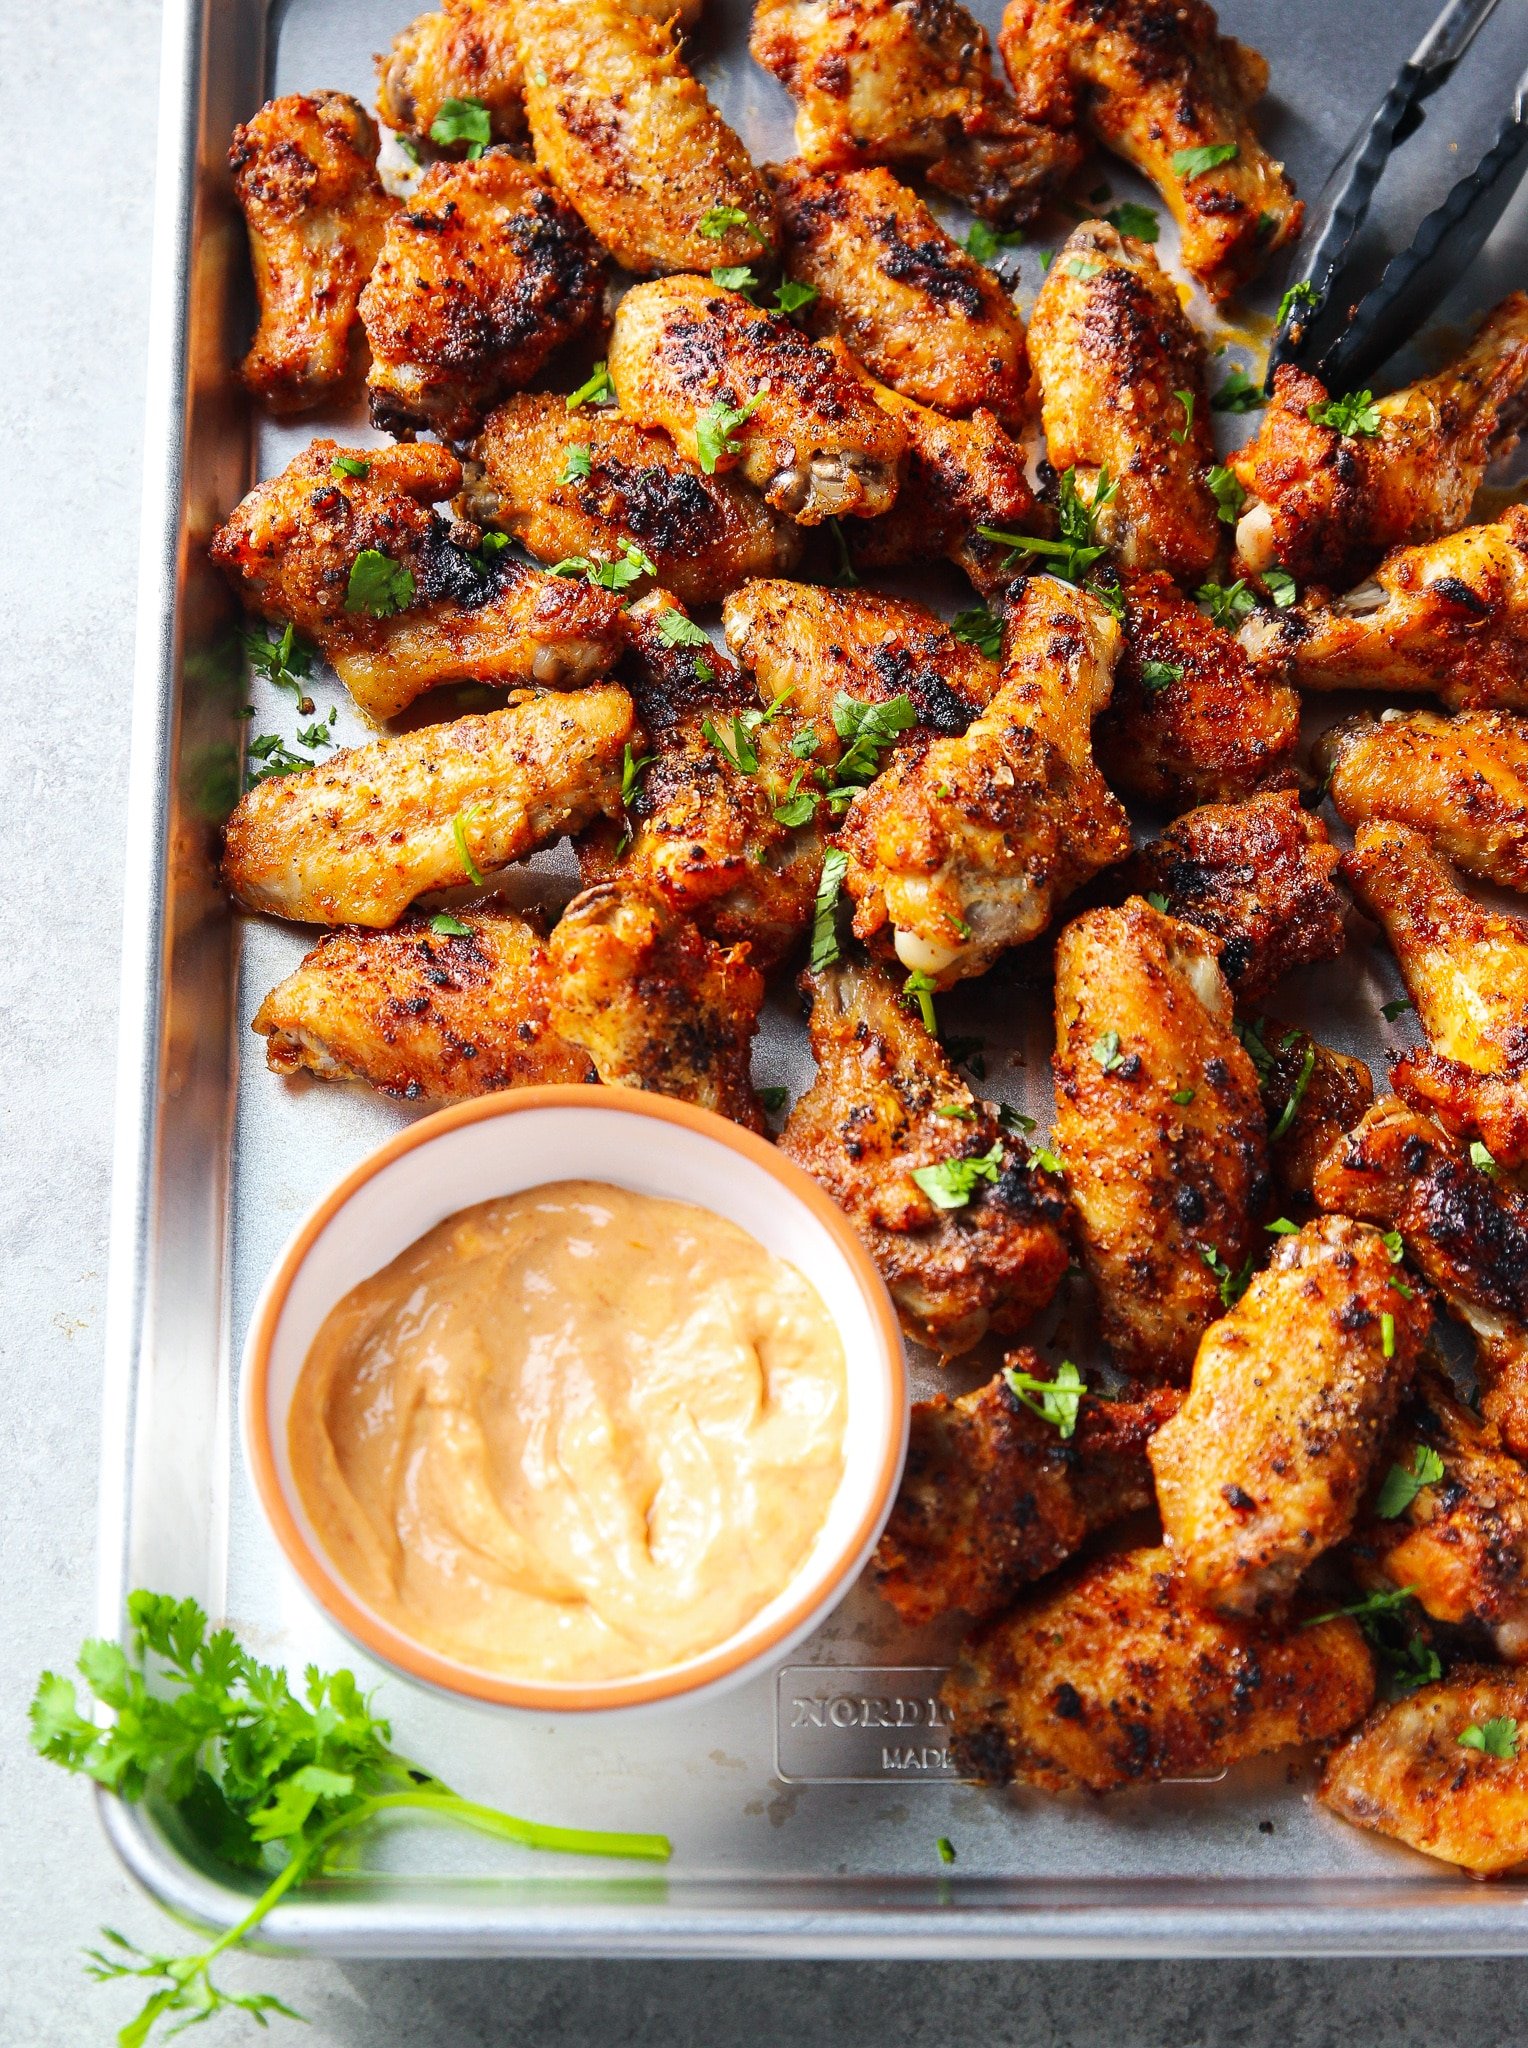 a pile of dry rubbed baked chicken wings on a metal sheet pan next to a small bowl of spicy mayo.